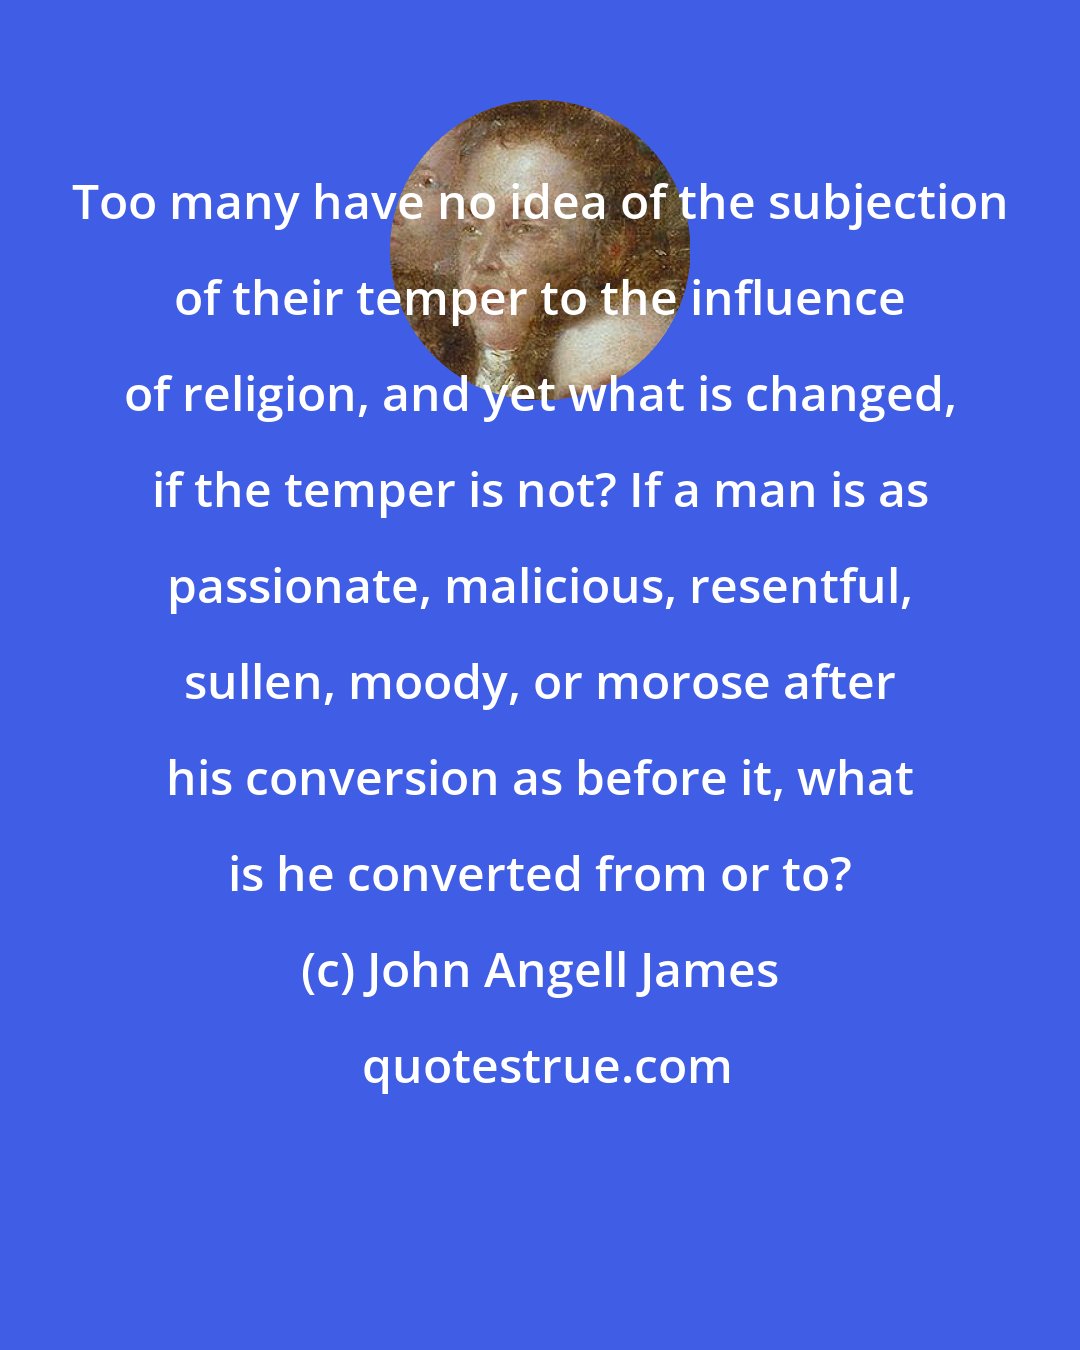 John Angell James: Too many have no idea of the subjection of their temper to the influence of religion, and yet what is changed, if the temper is not? If a man is as passionate, malicious, resentful, sullen, moody, or morose after his conversion as before it, what is he converted from or to?